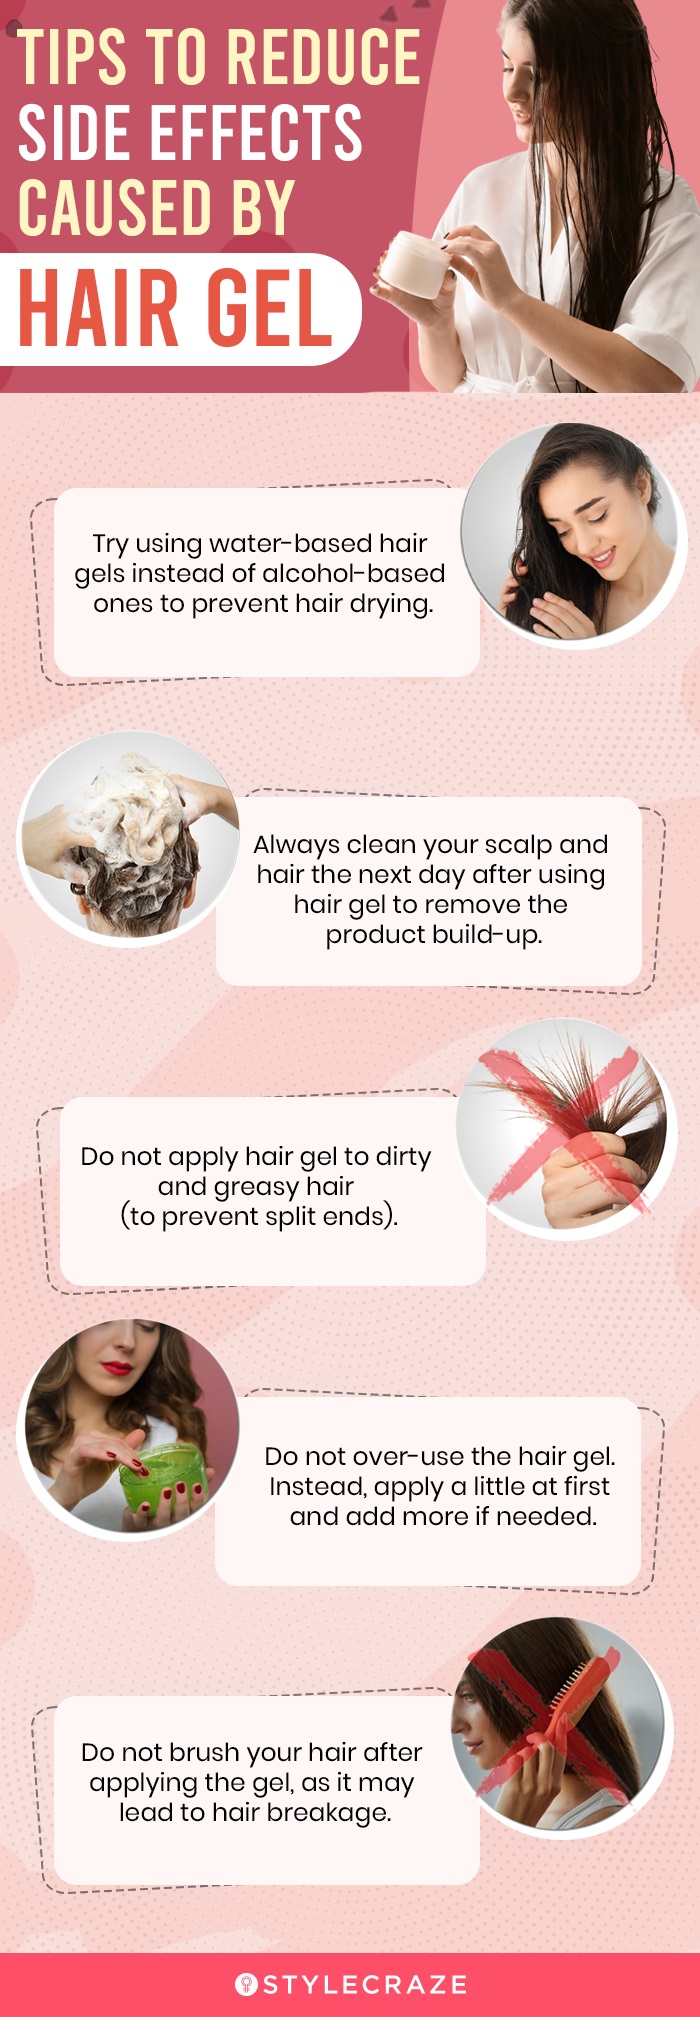 tips to reduce side effects caused by hair gel (infographic)